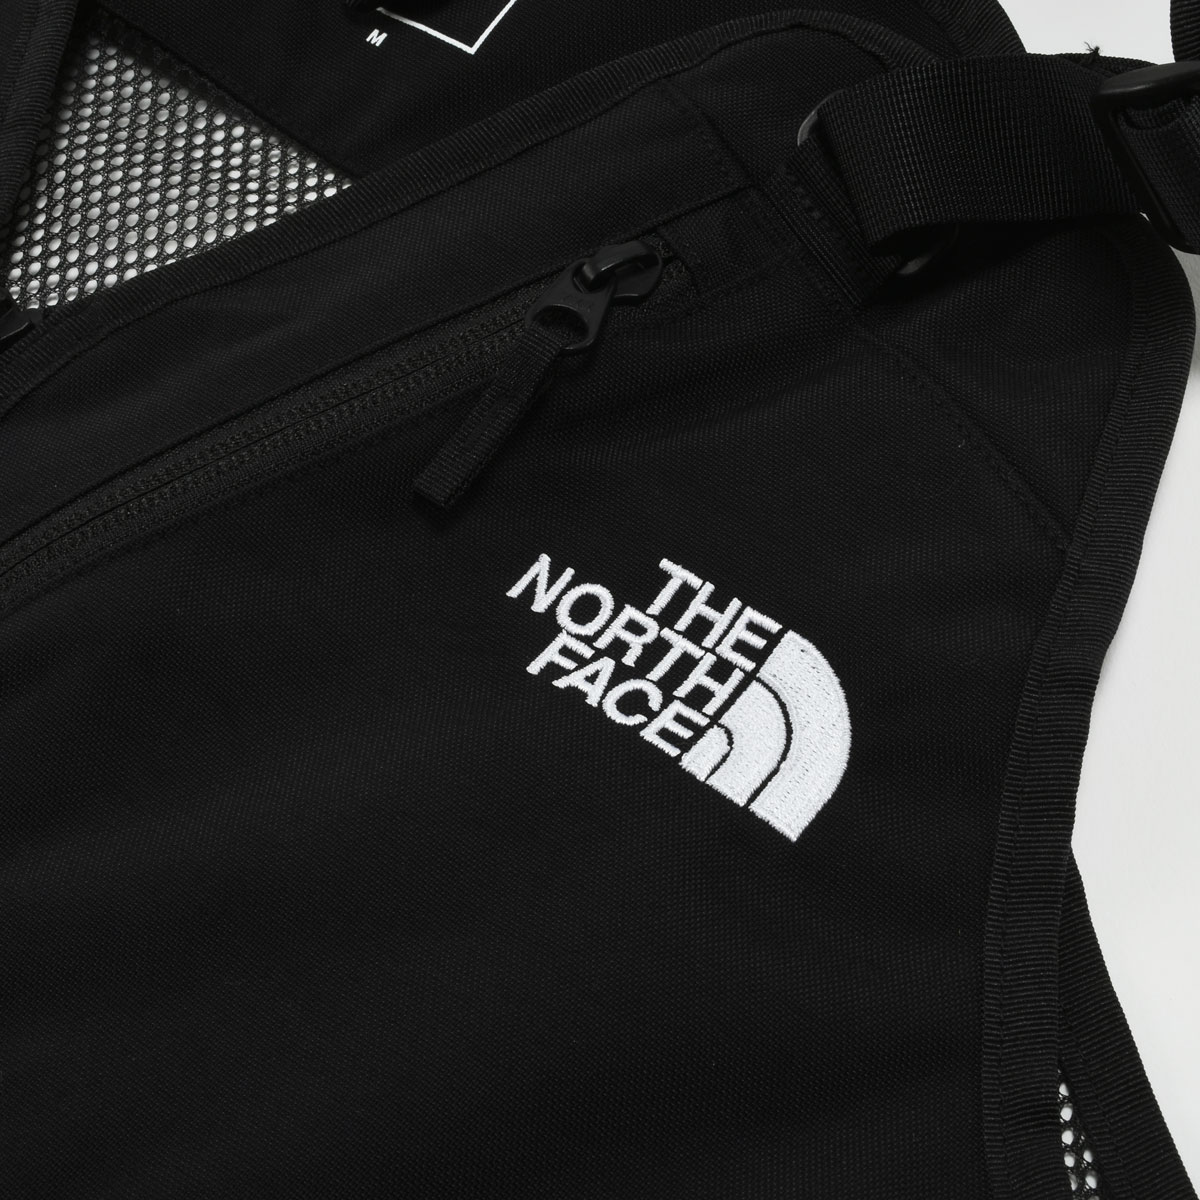 THE NORTH FACE NP22231 GEAR MESH VEST - メンズ